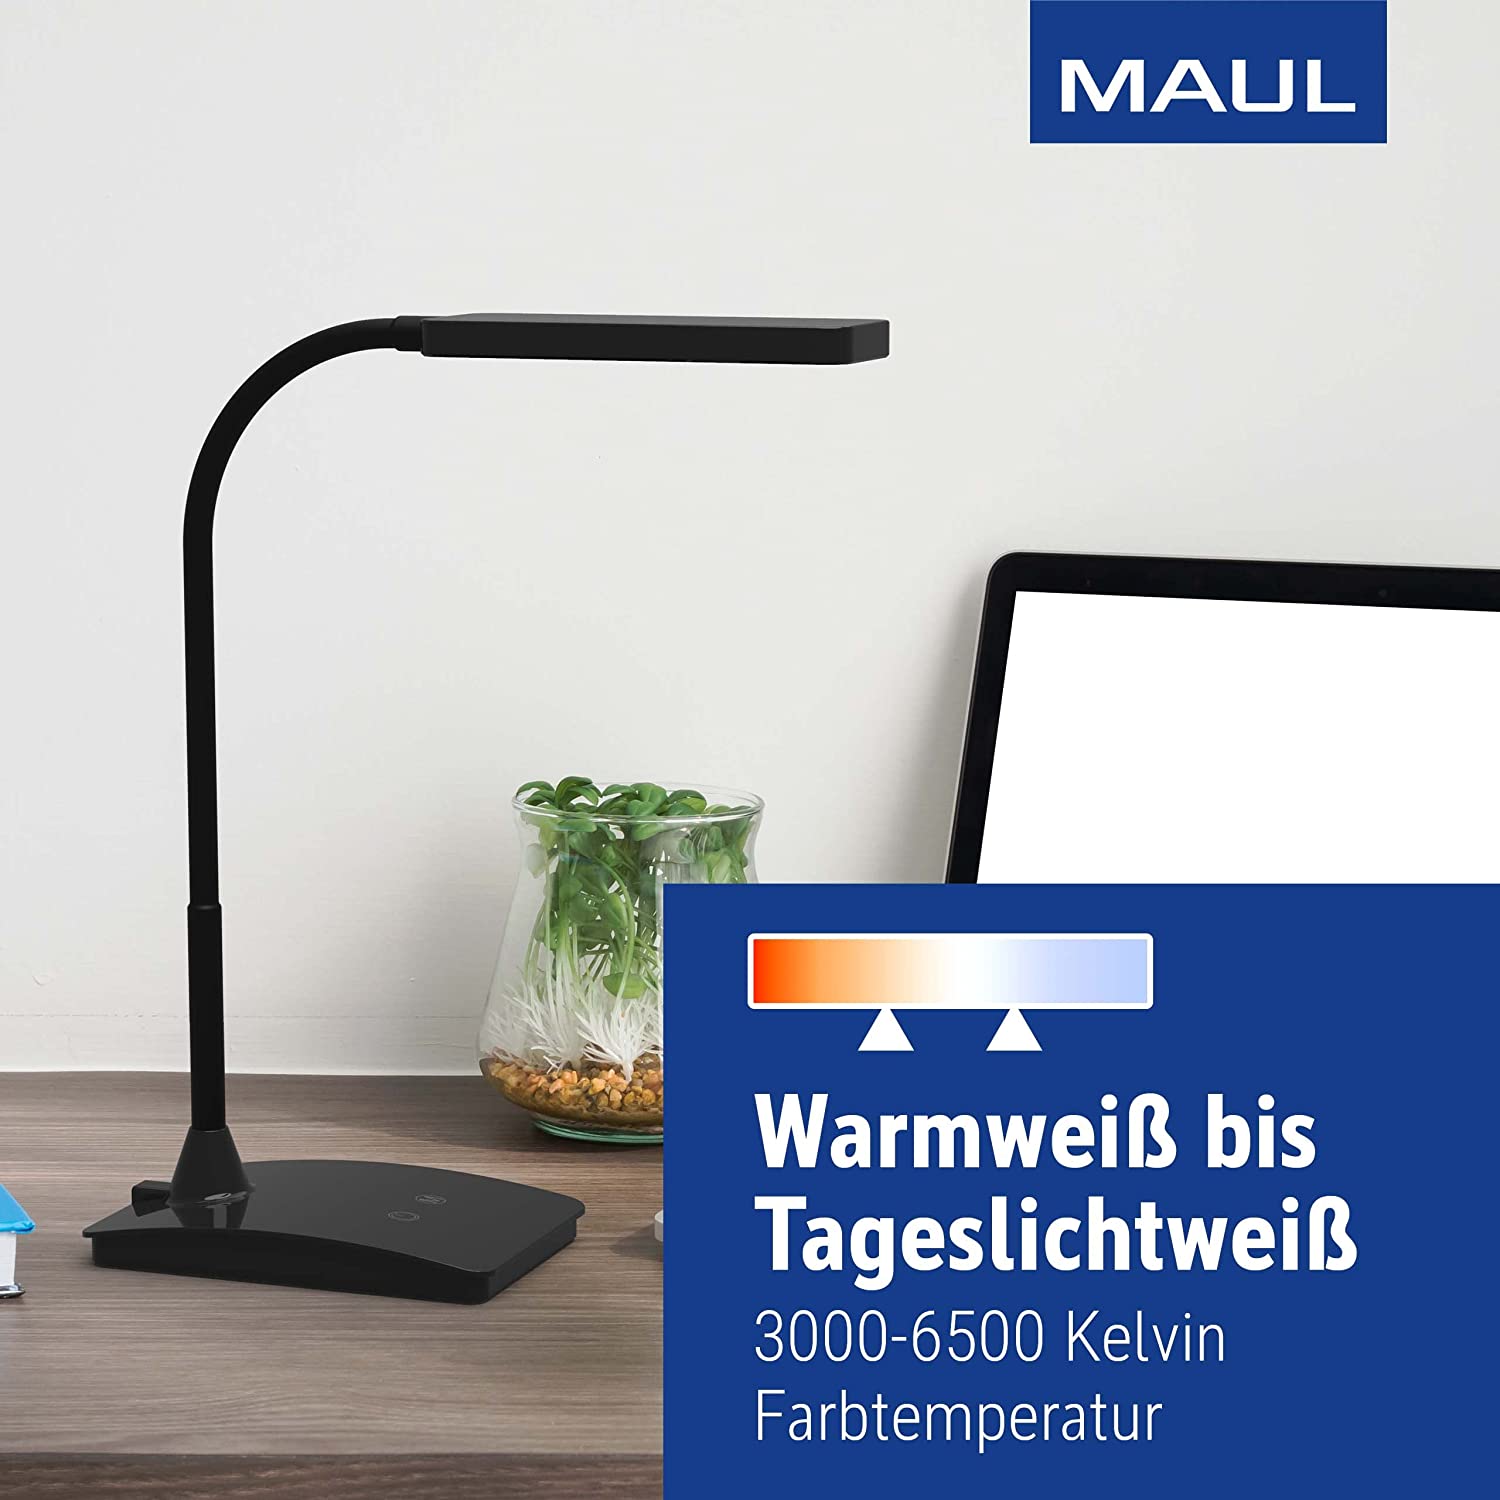 MAUL pearly 8201790 colour vario LED-Tischlampe 6 W - Schwarz